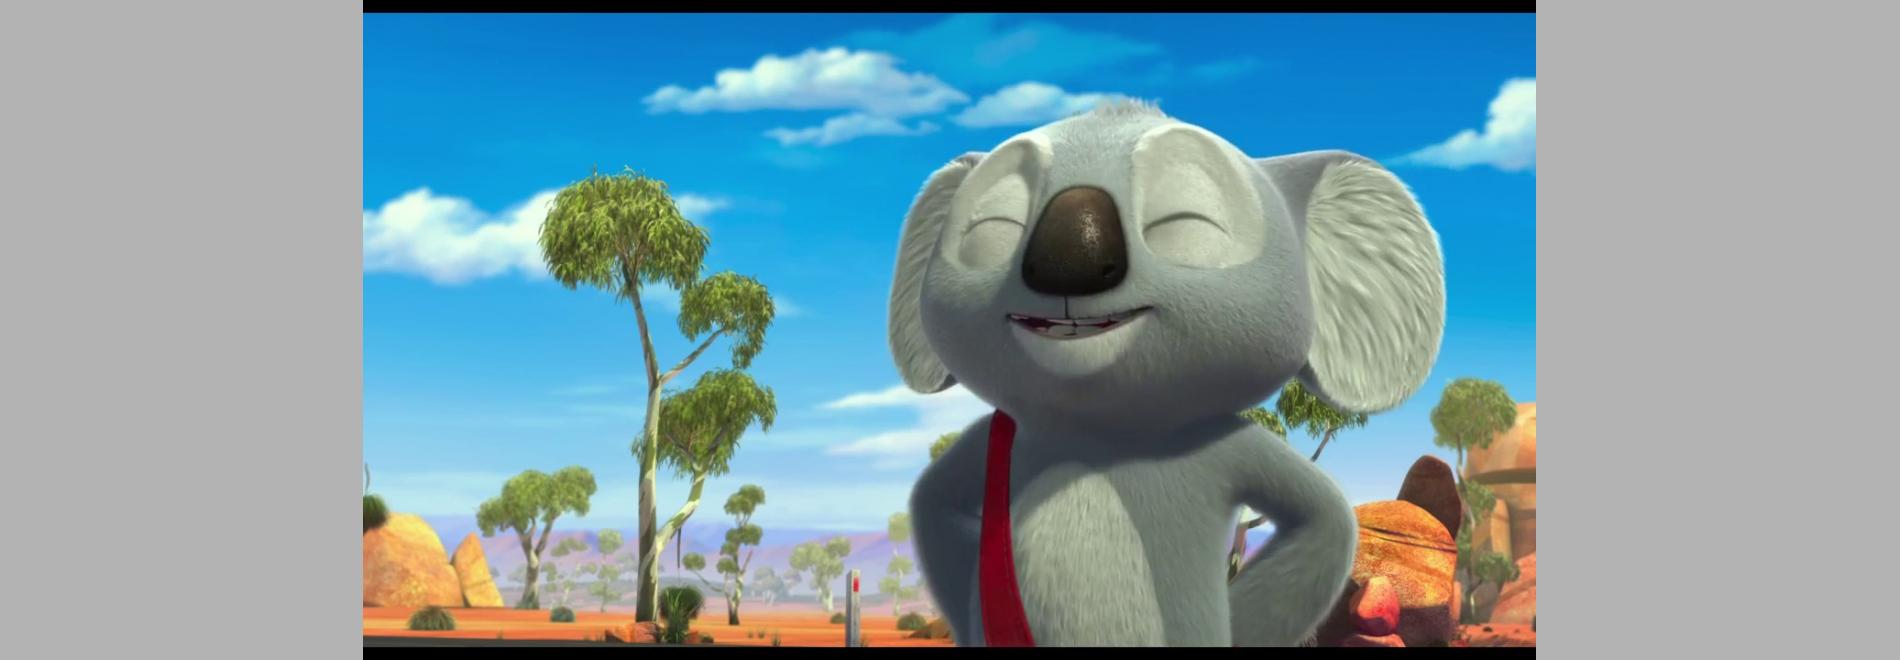 Blinky Bill the Movie (Deane Taylor, Noel Cleary, Alexs Stadermann, Alex Weight, 2015)